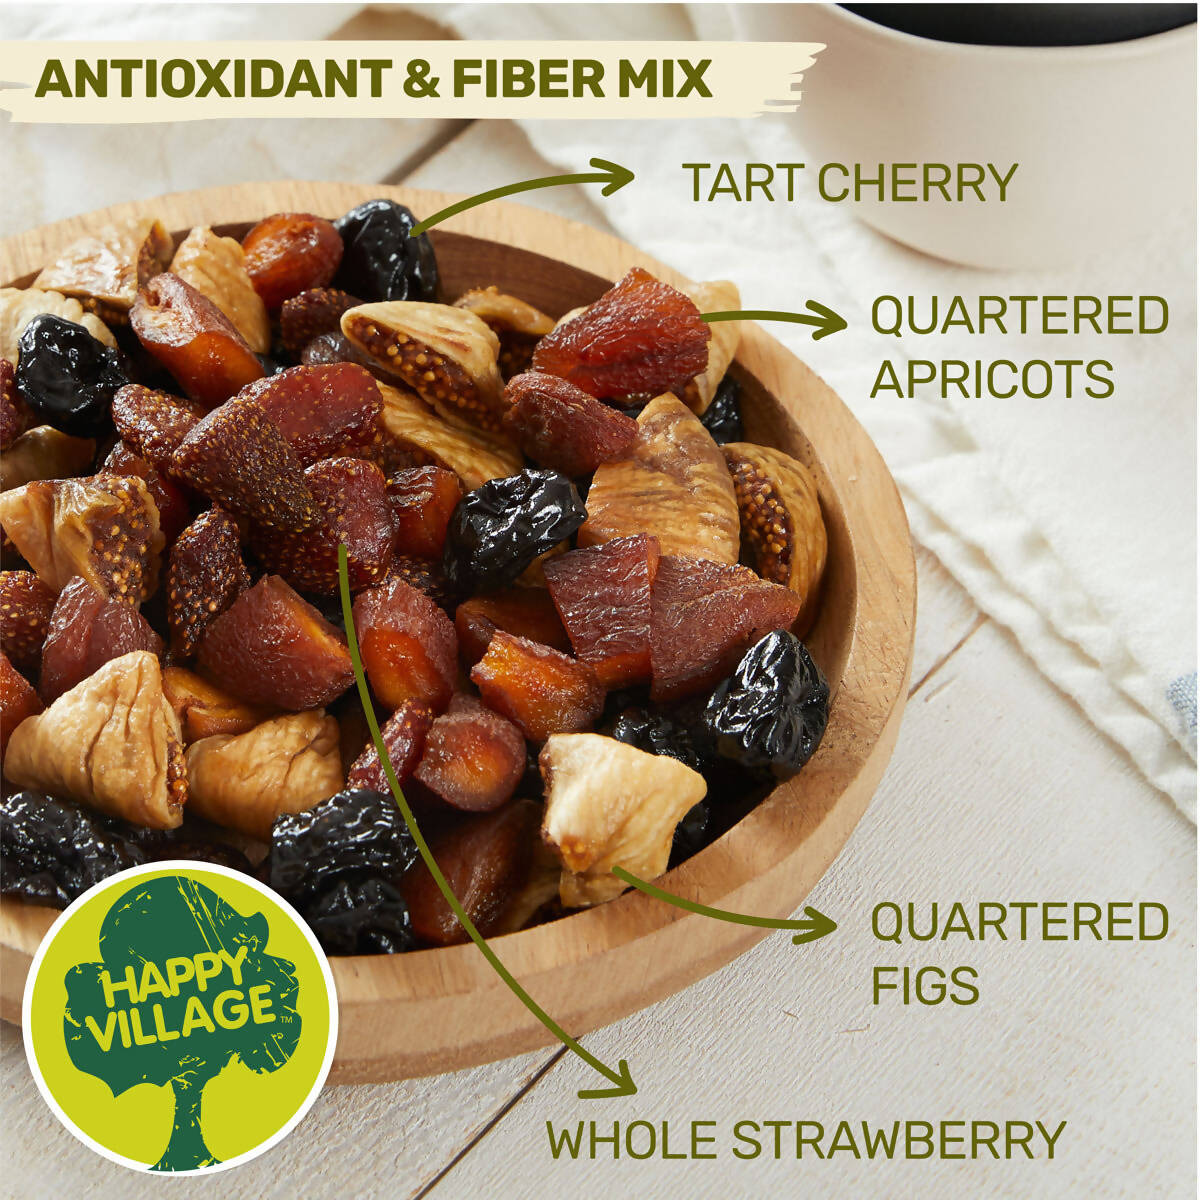 Organic Soft Dried Fruit Medley, 7.1 oz at Whole Foods Market